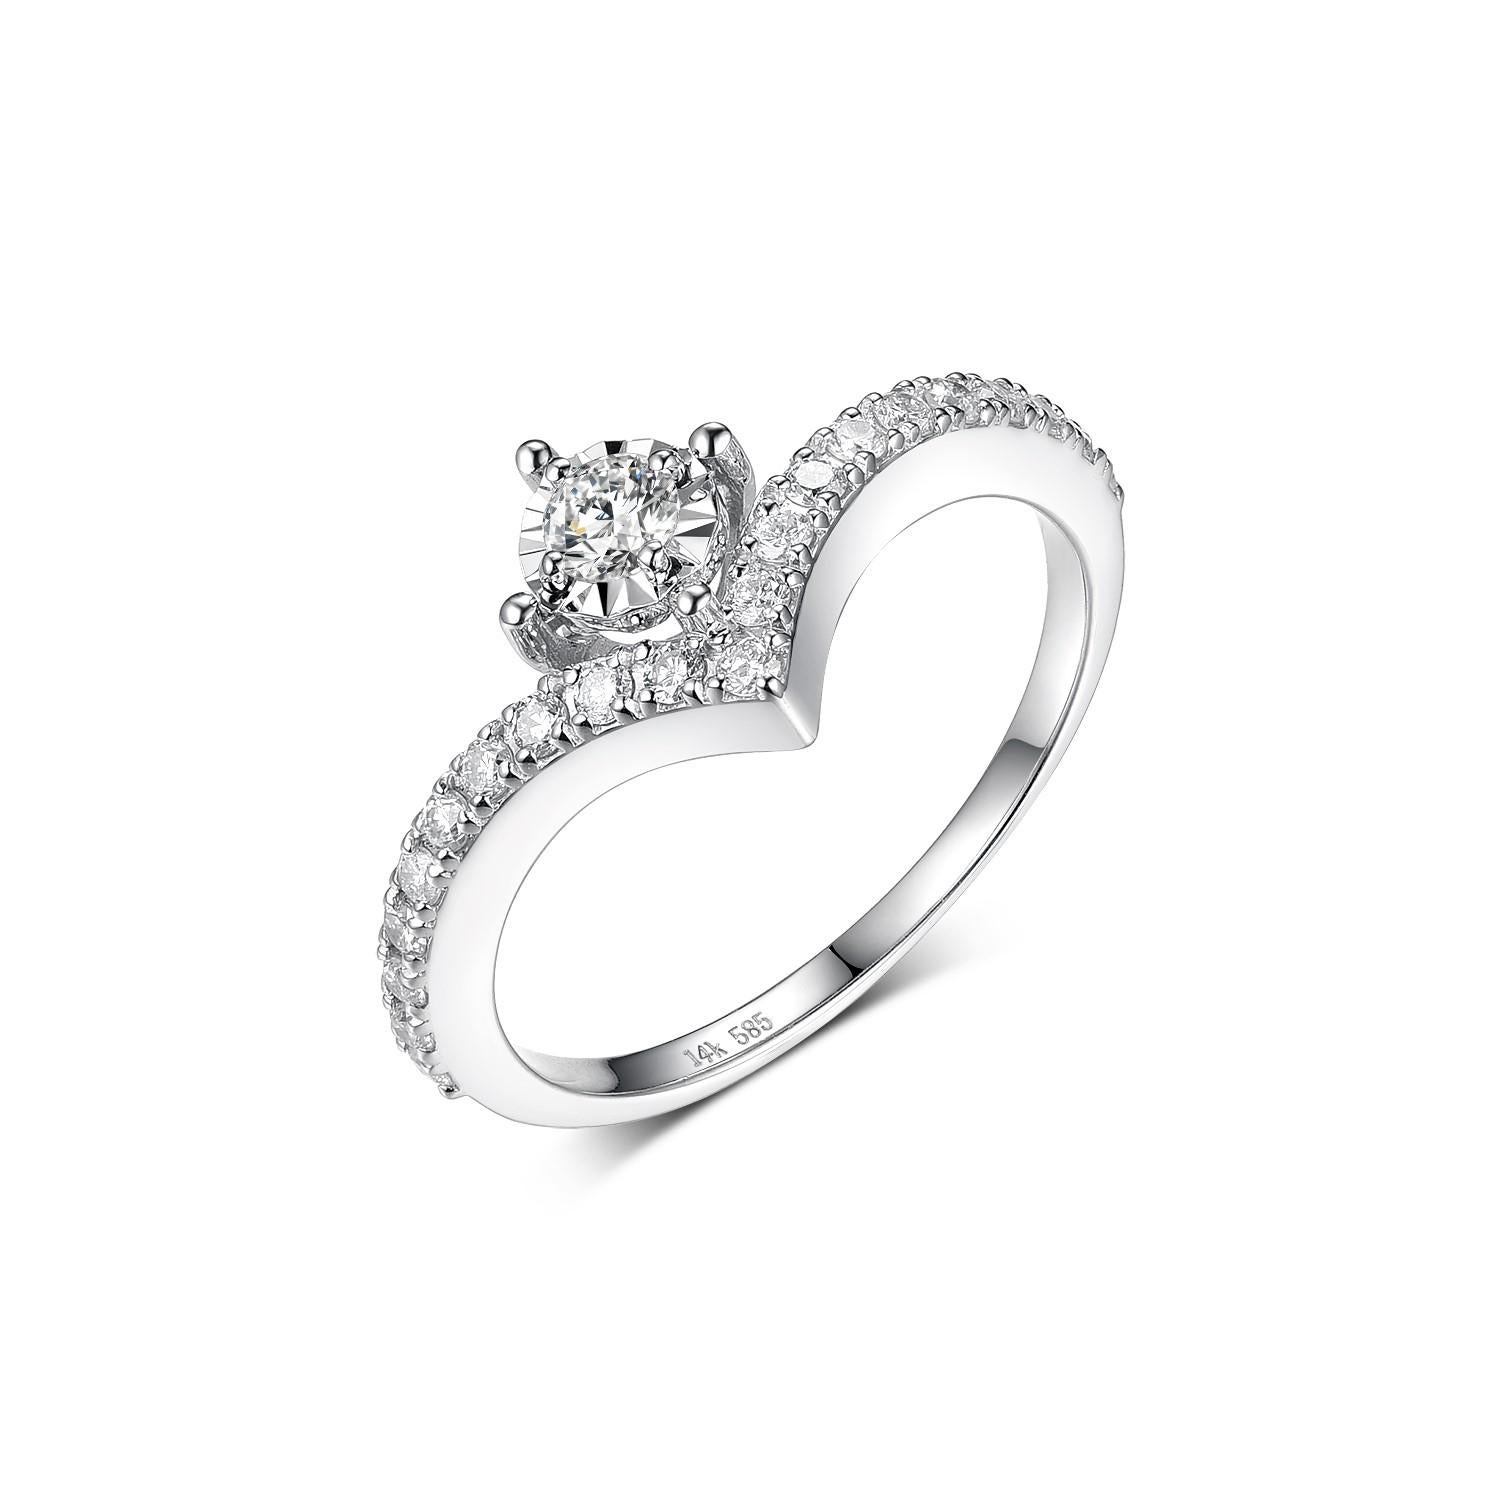 This ring features the center piece is surrounded by 0.23 carats of round diamonds set in 14 karat white gold.  The shoulder of the ring is set with 0.23 carat of white round diamonds.

1 Main Diamond 0.23 carat
White round diamonds 0.23